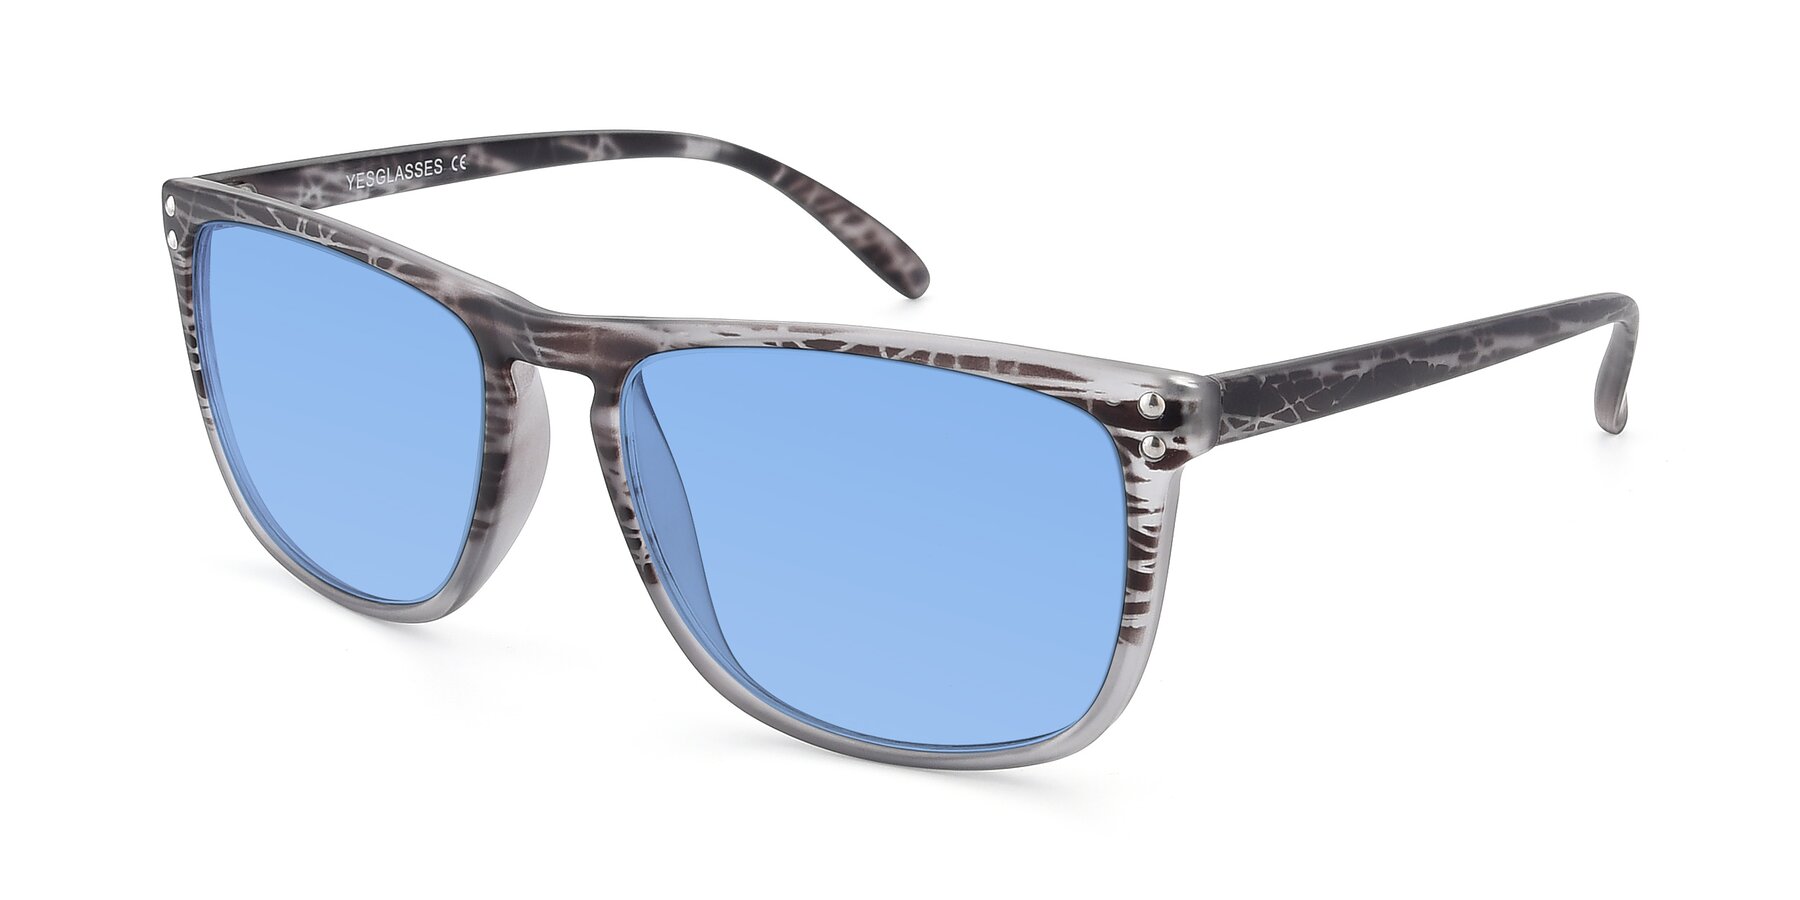 Angle of SSR411 in Translucent Floral Grey with Medium Blue Tinted Lenses